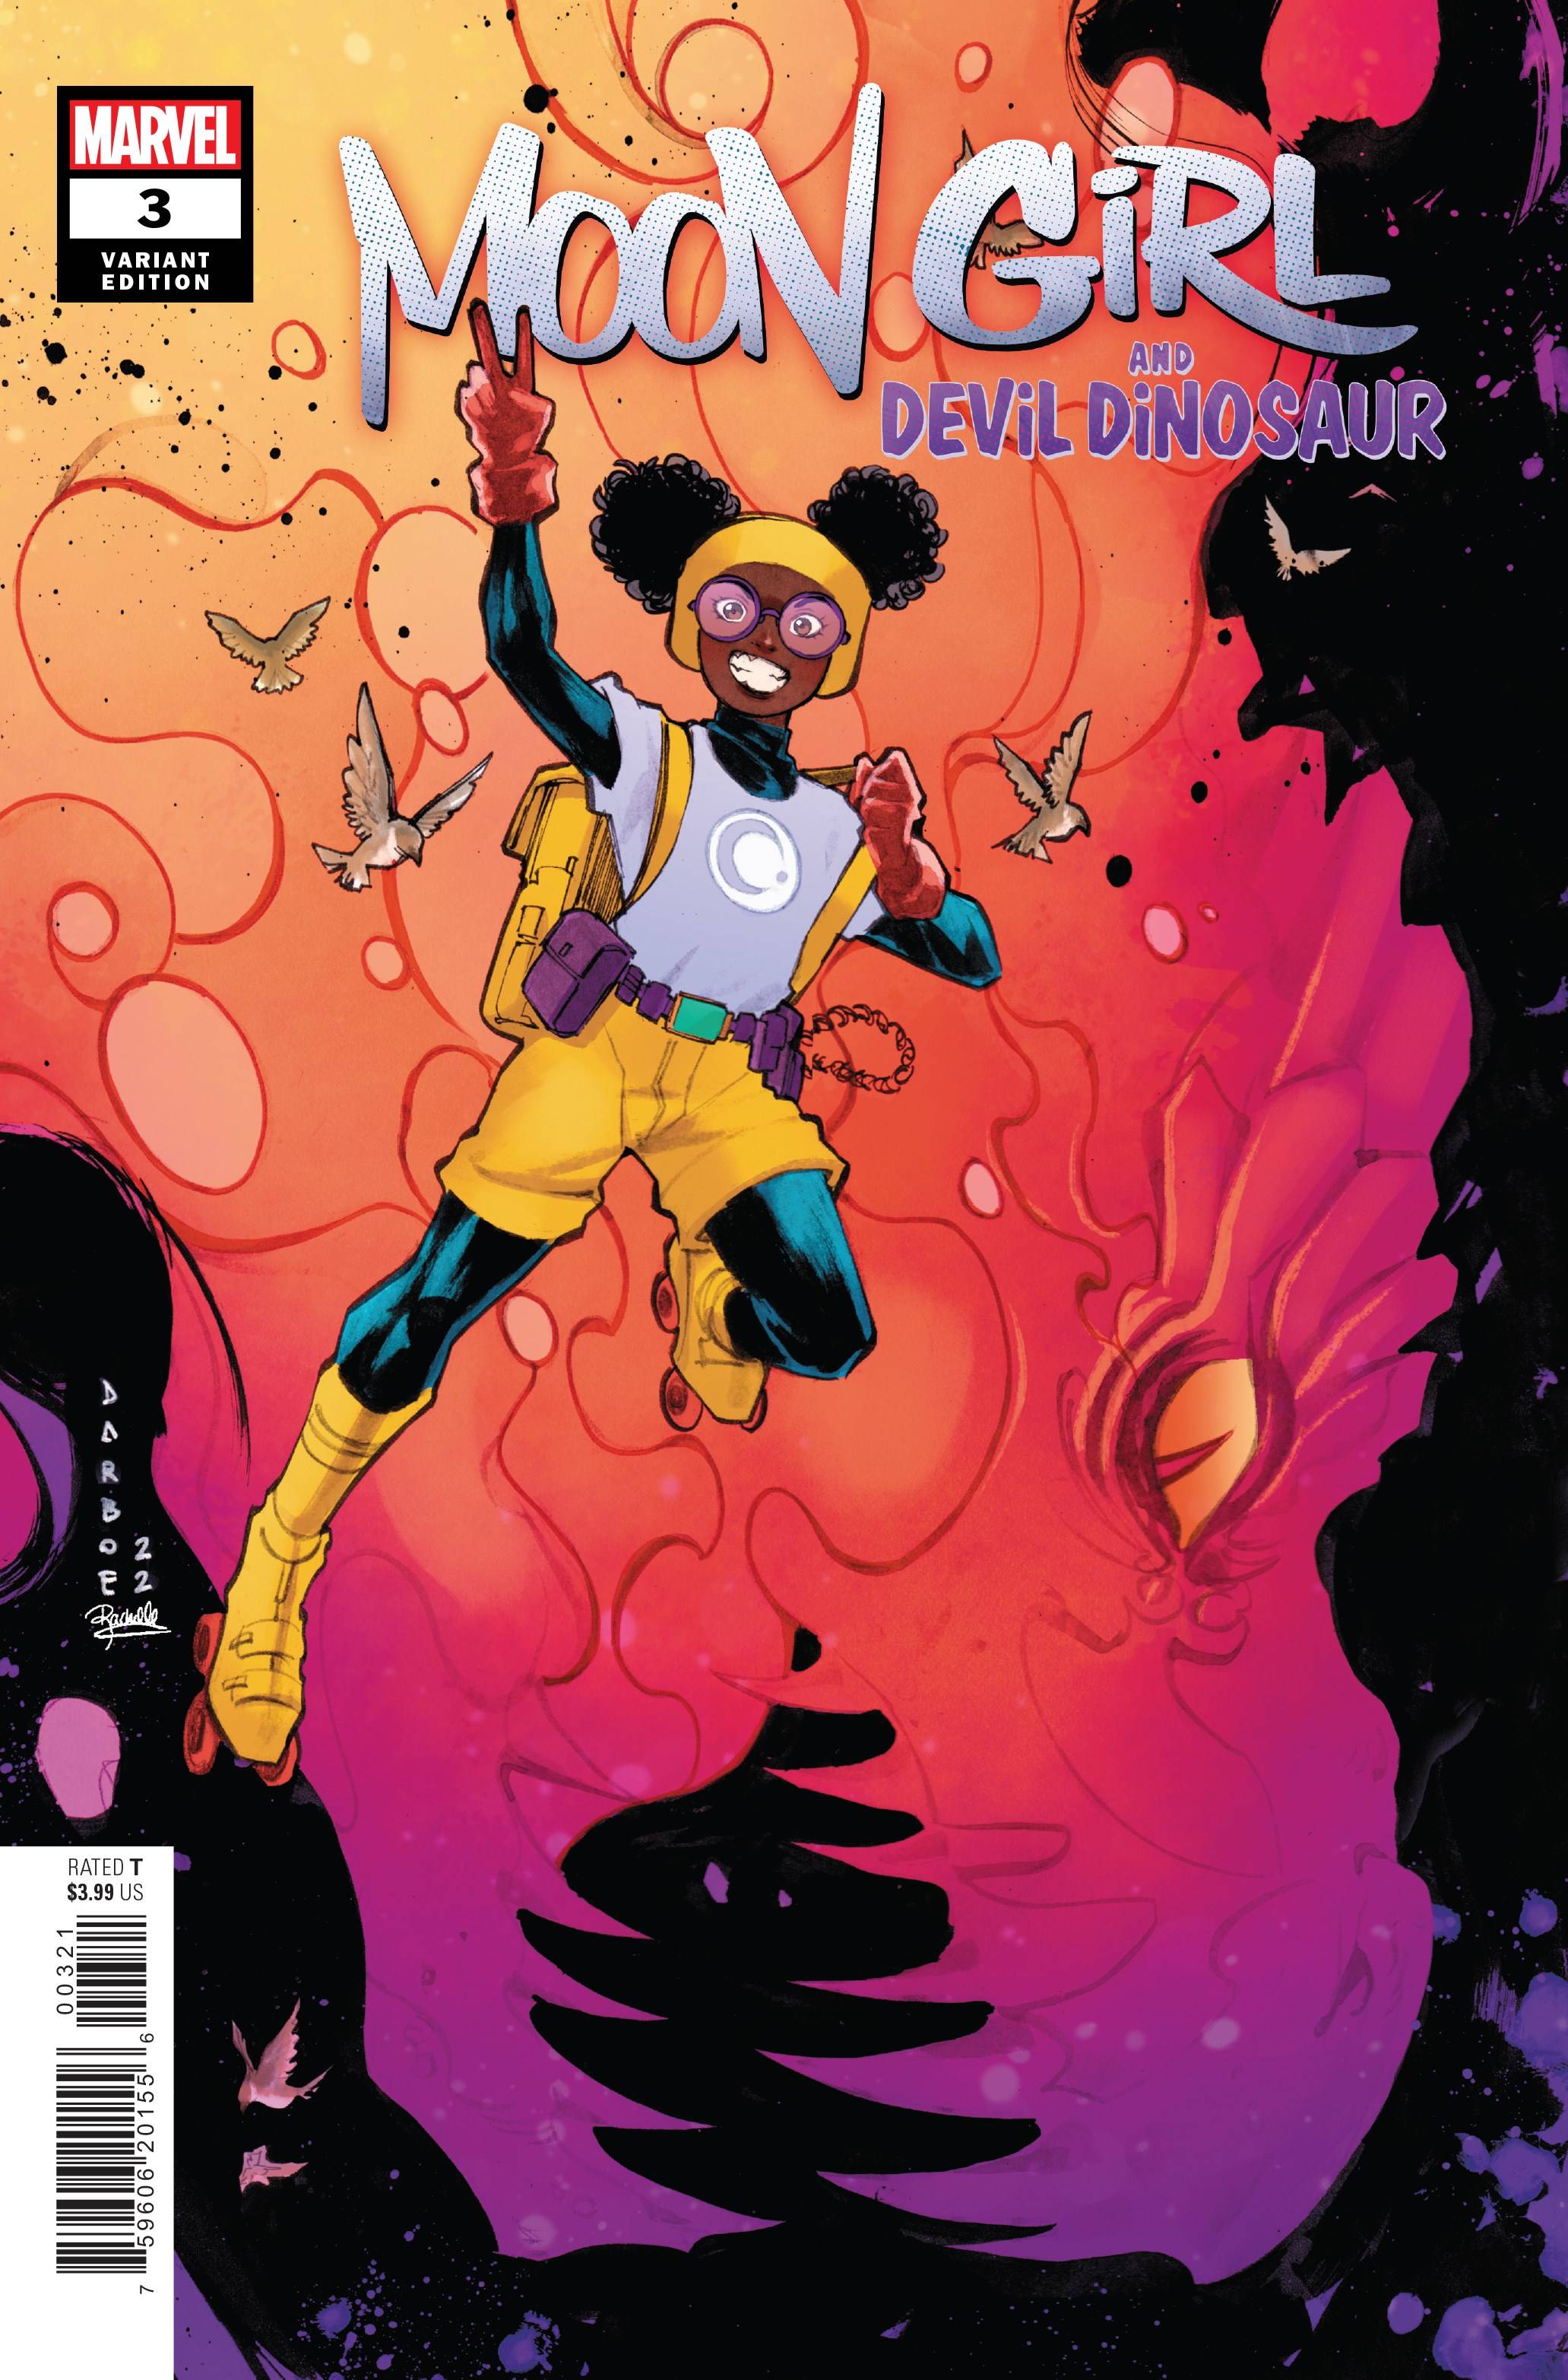 02/08/2023 MOON GIRL AND DEVIL DINOSAUR #3 (OF 5) DARBOE pic